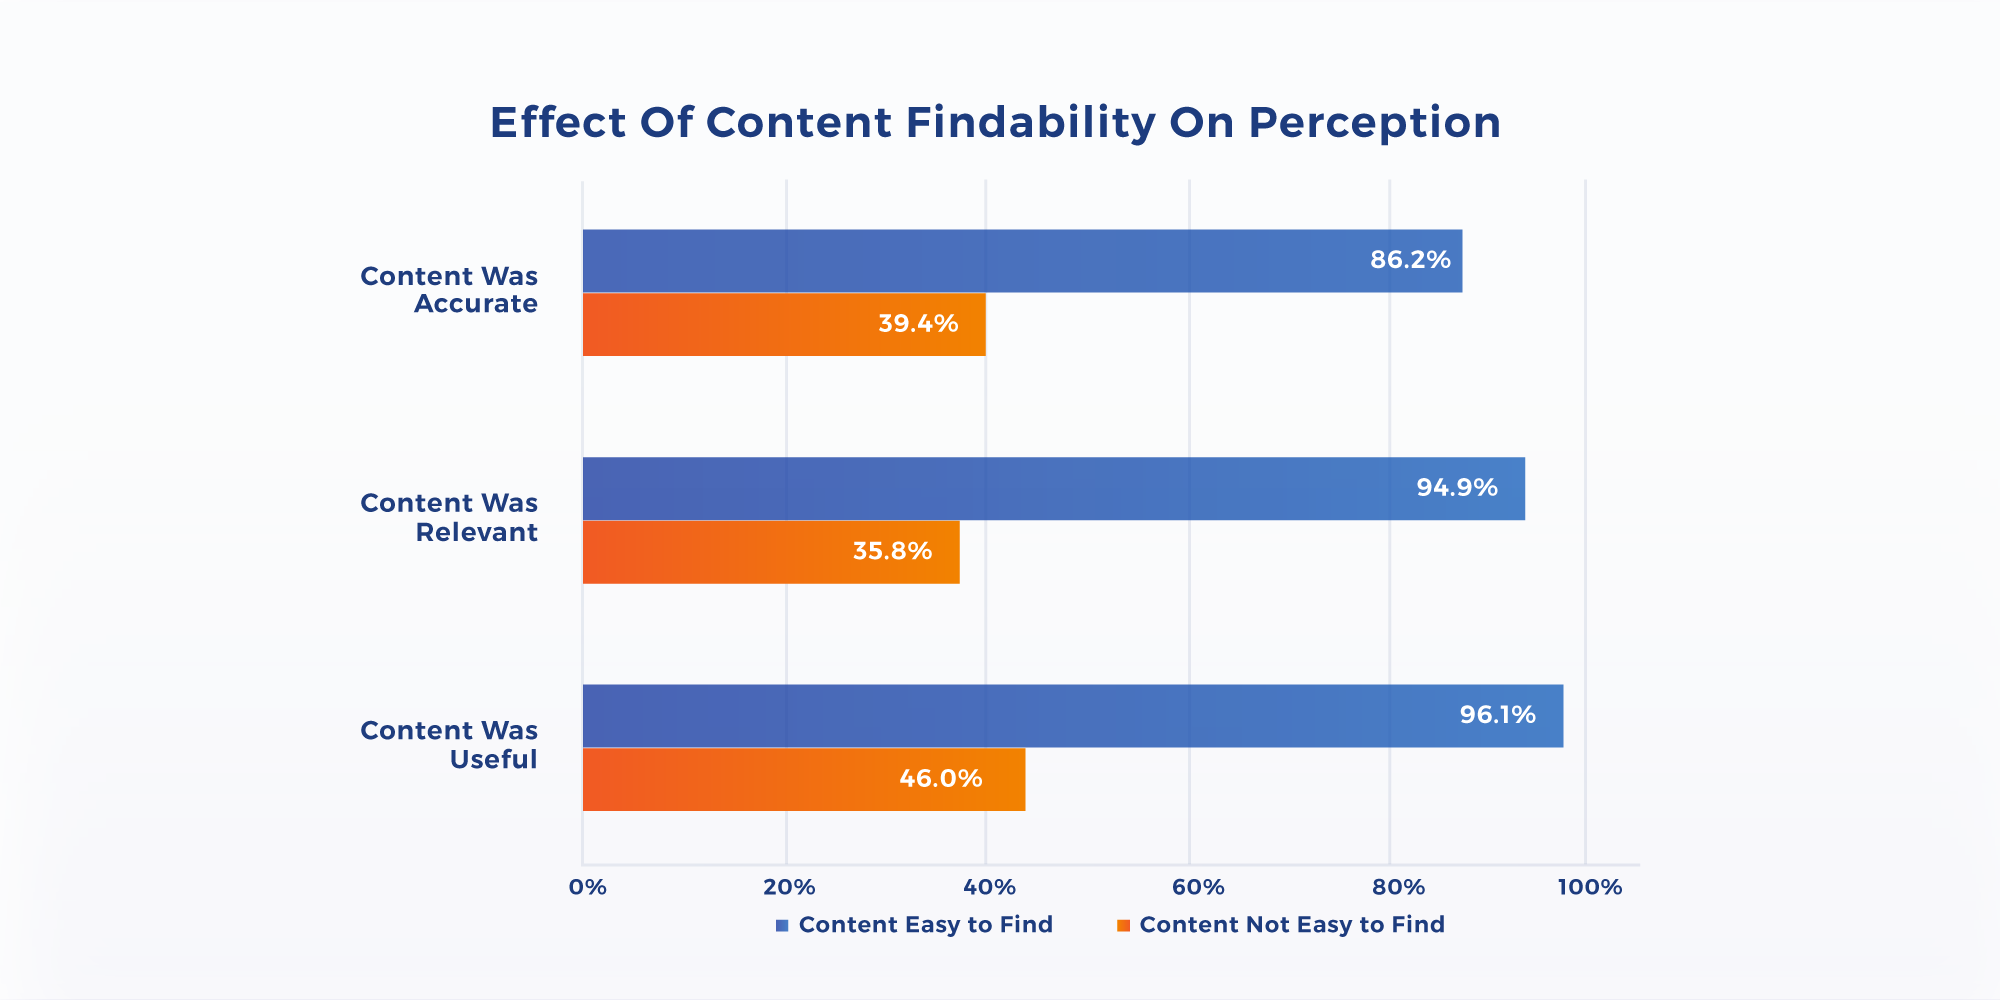 Effect of Content Findabitlity